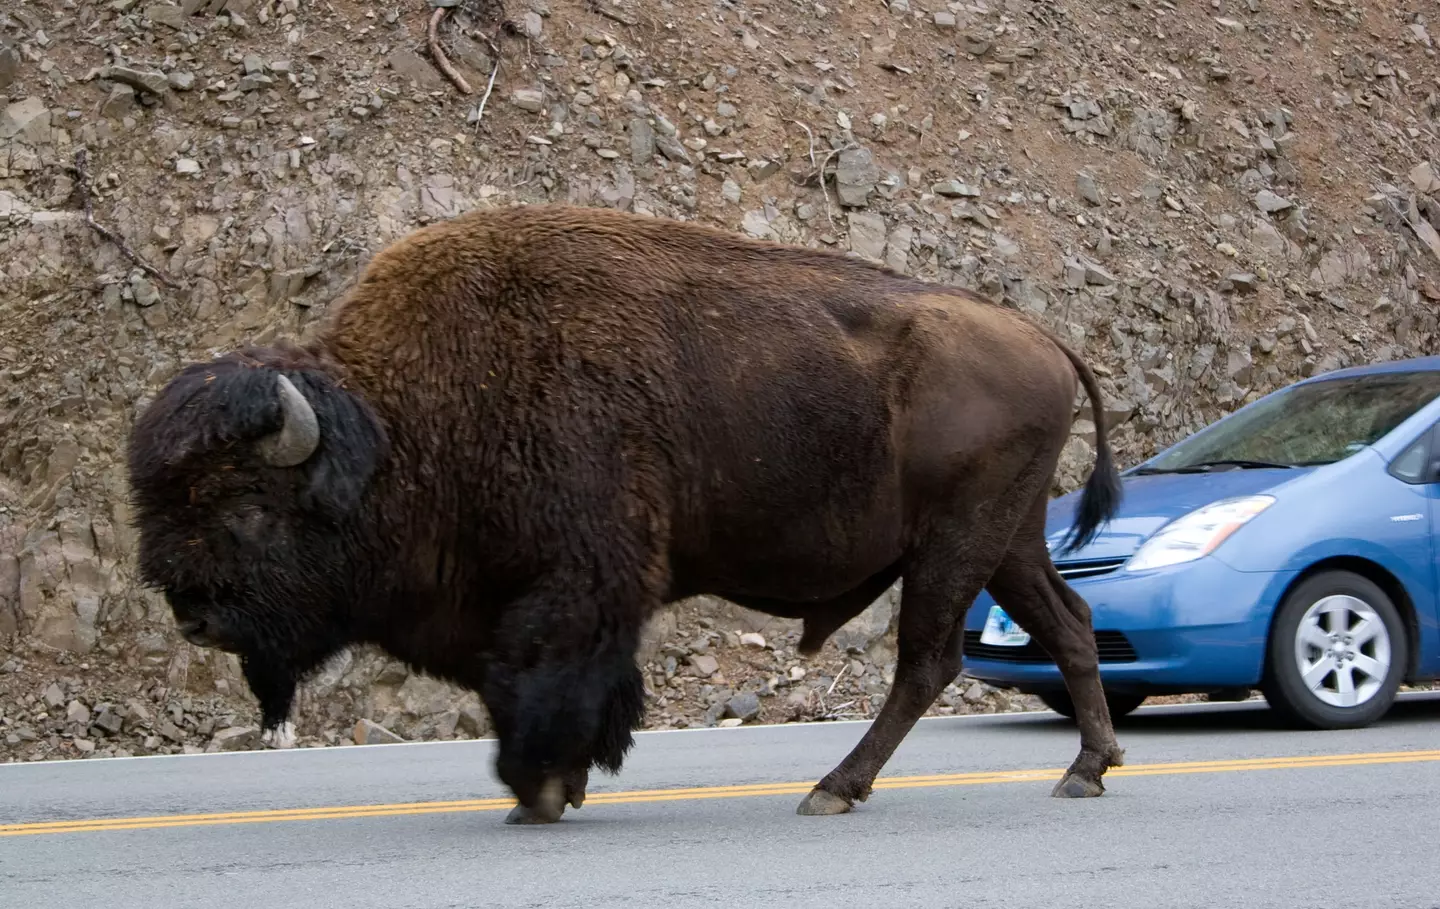 Bison walking in the middle of the road in Yellowstone National Park.